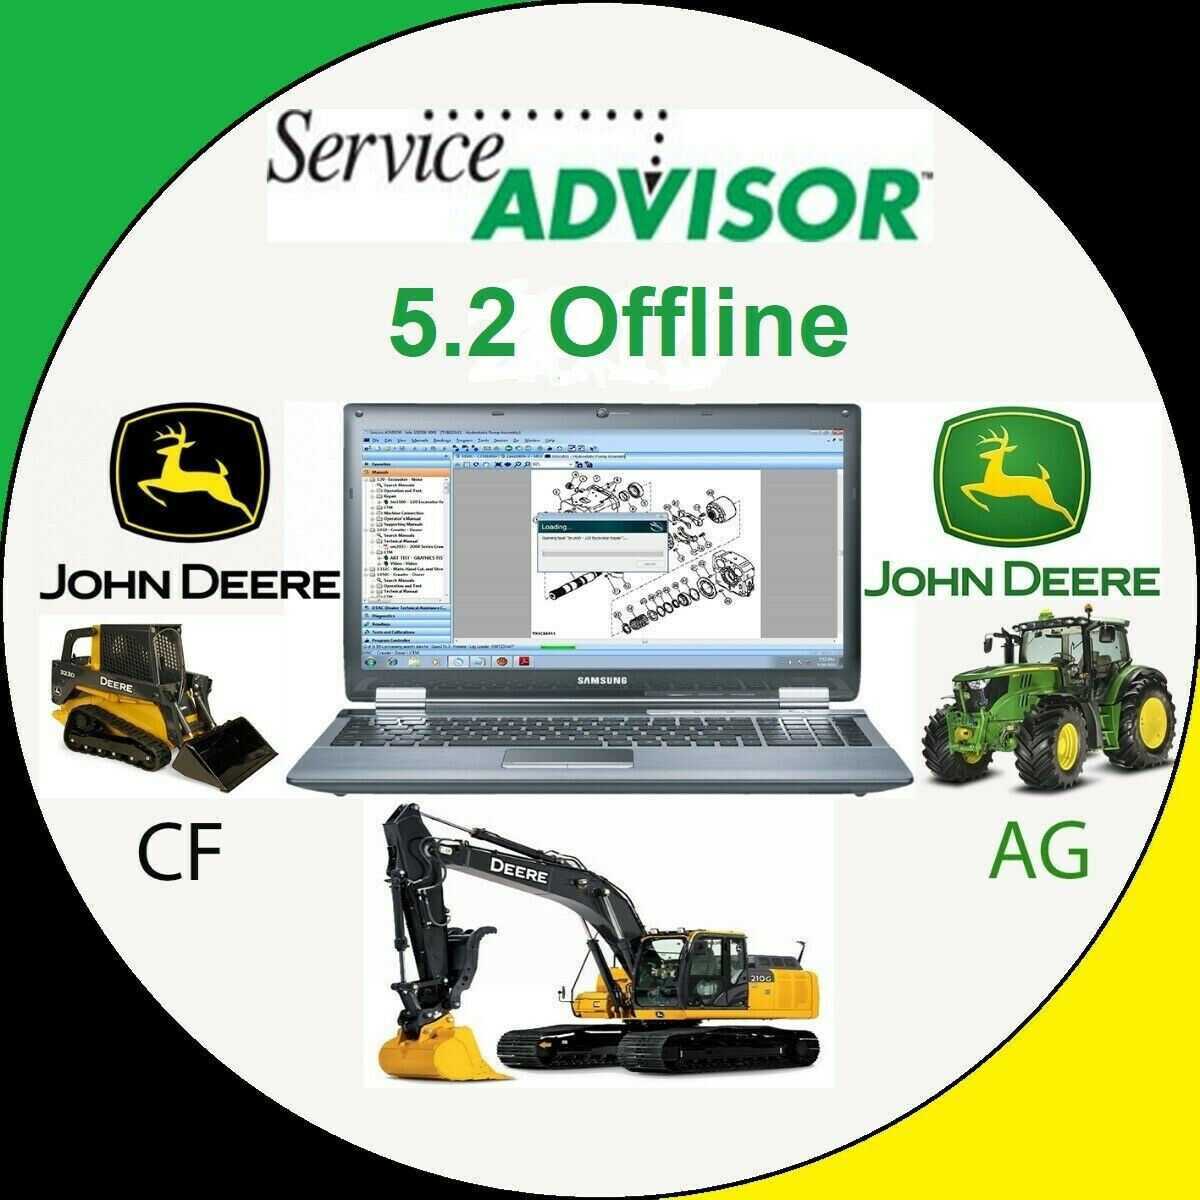 John deere service advisor 5.2.523 agriculture and turf equipment division 2019